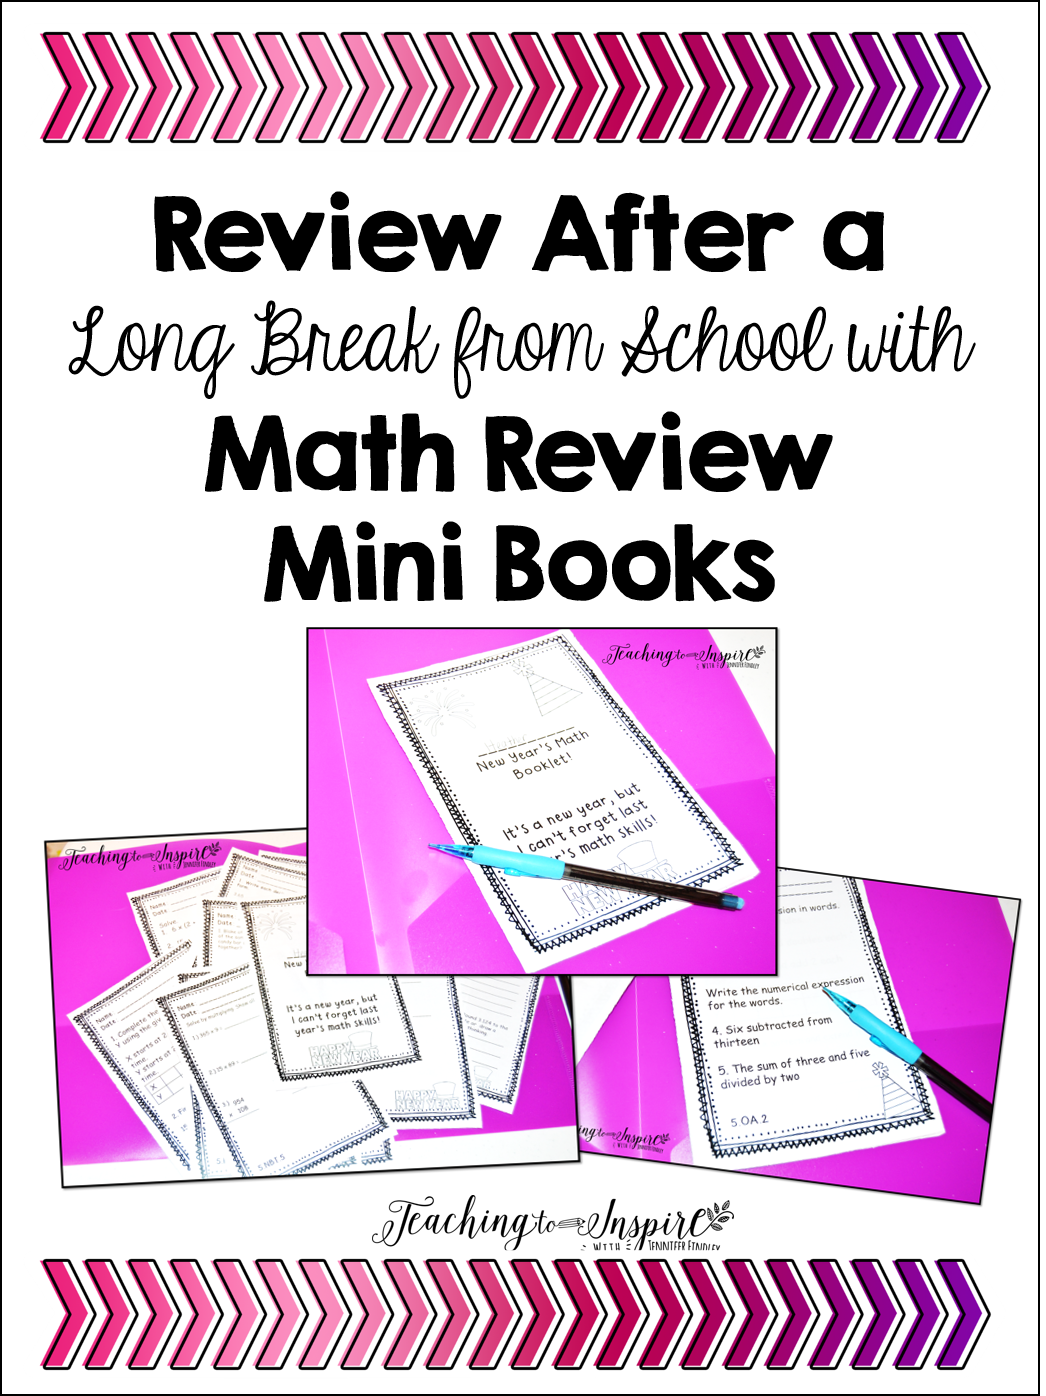 Review after a long break from school with math review books.